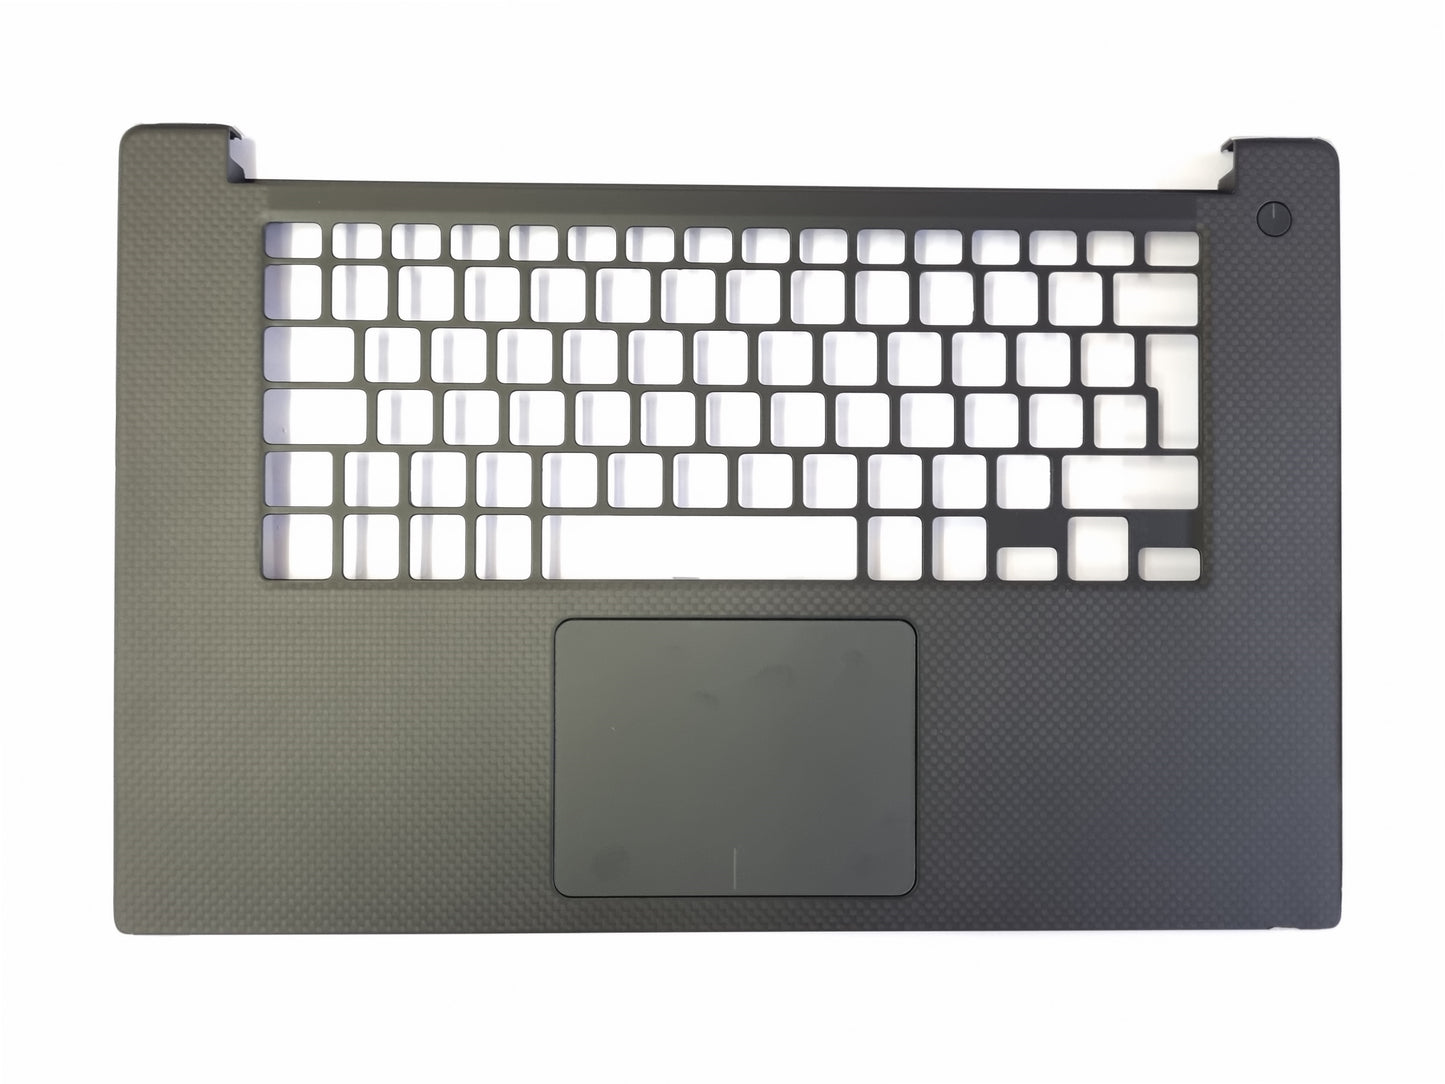 Dell XPS 15 9560 Precision 5520 Laptop Palmrest with Touchpad KKD96